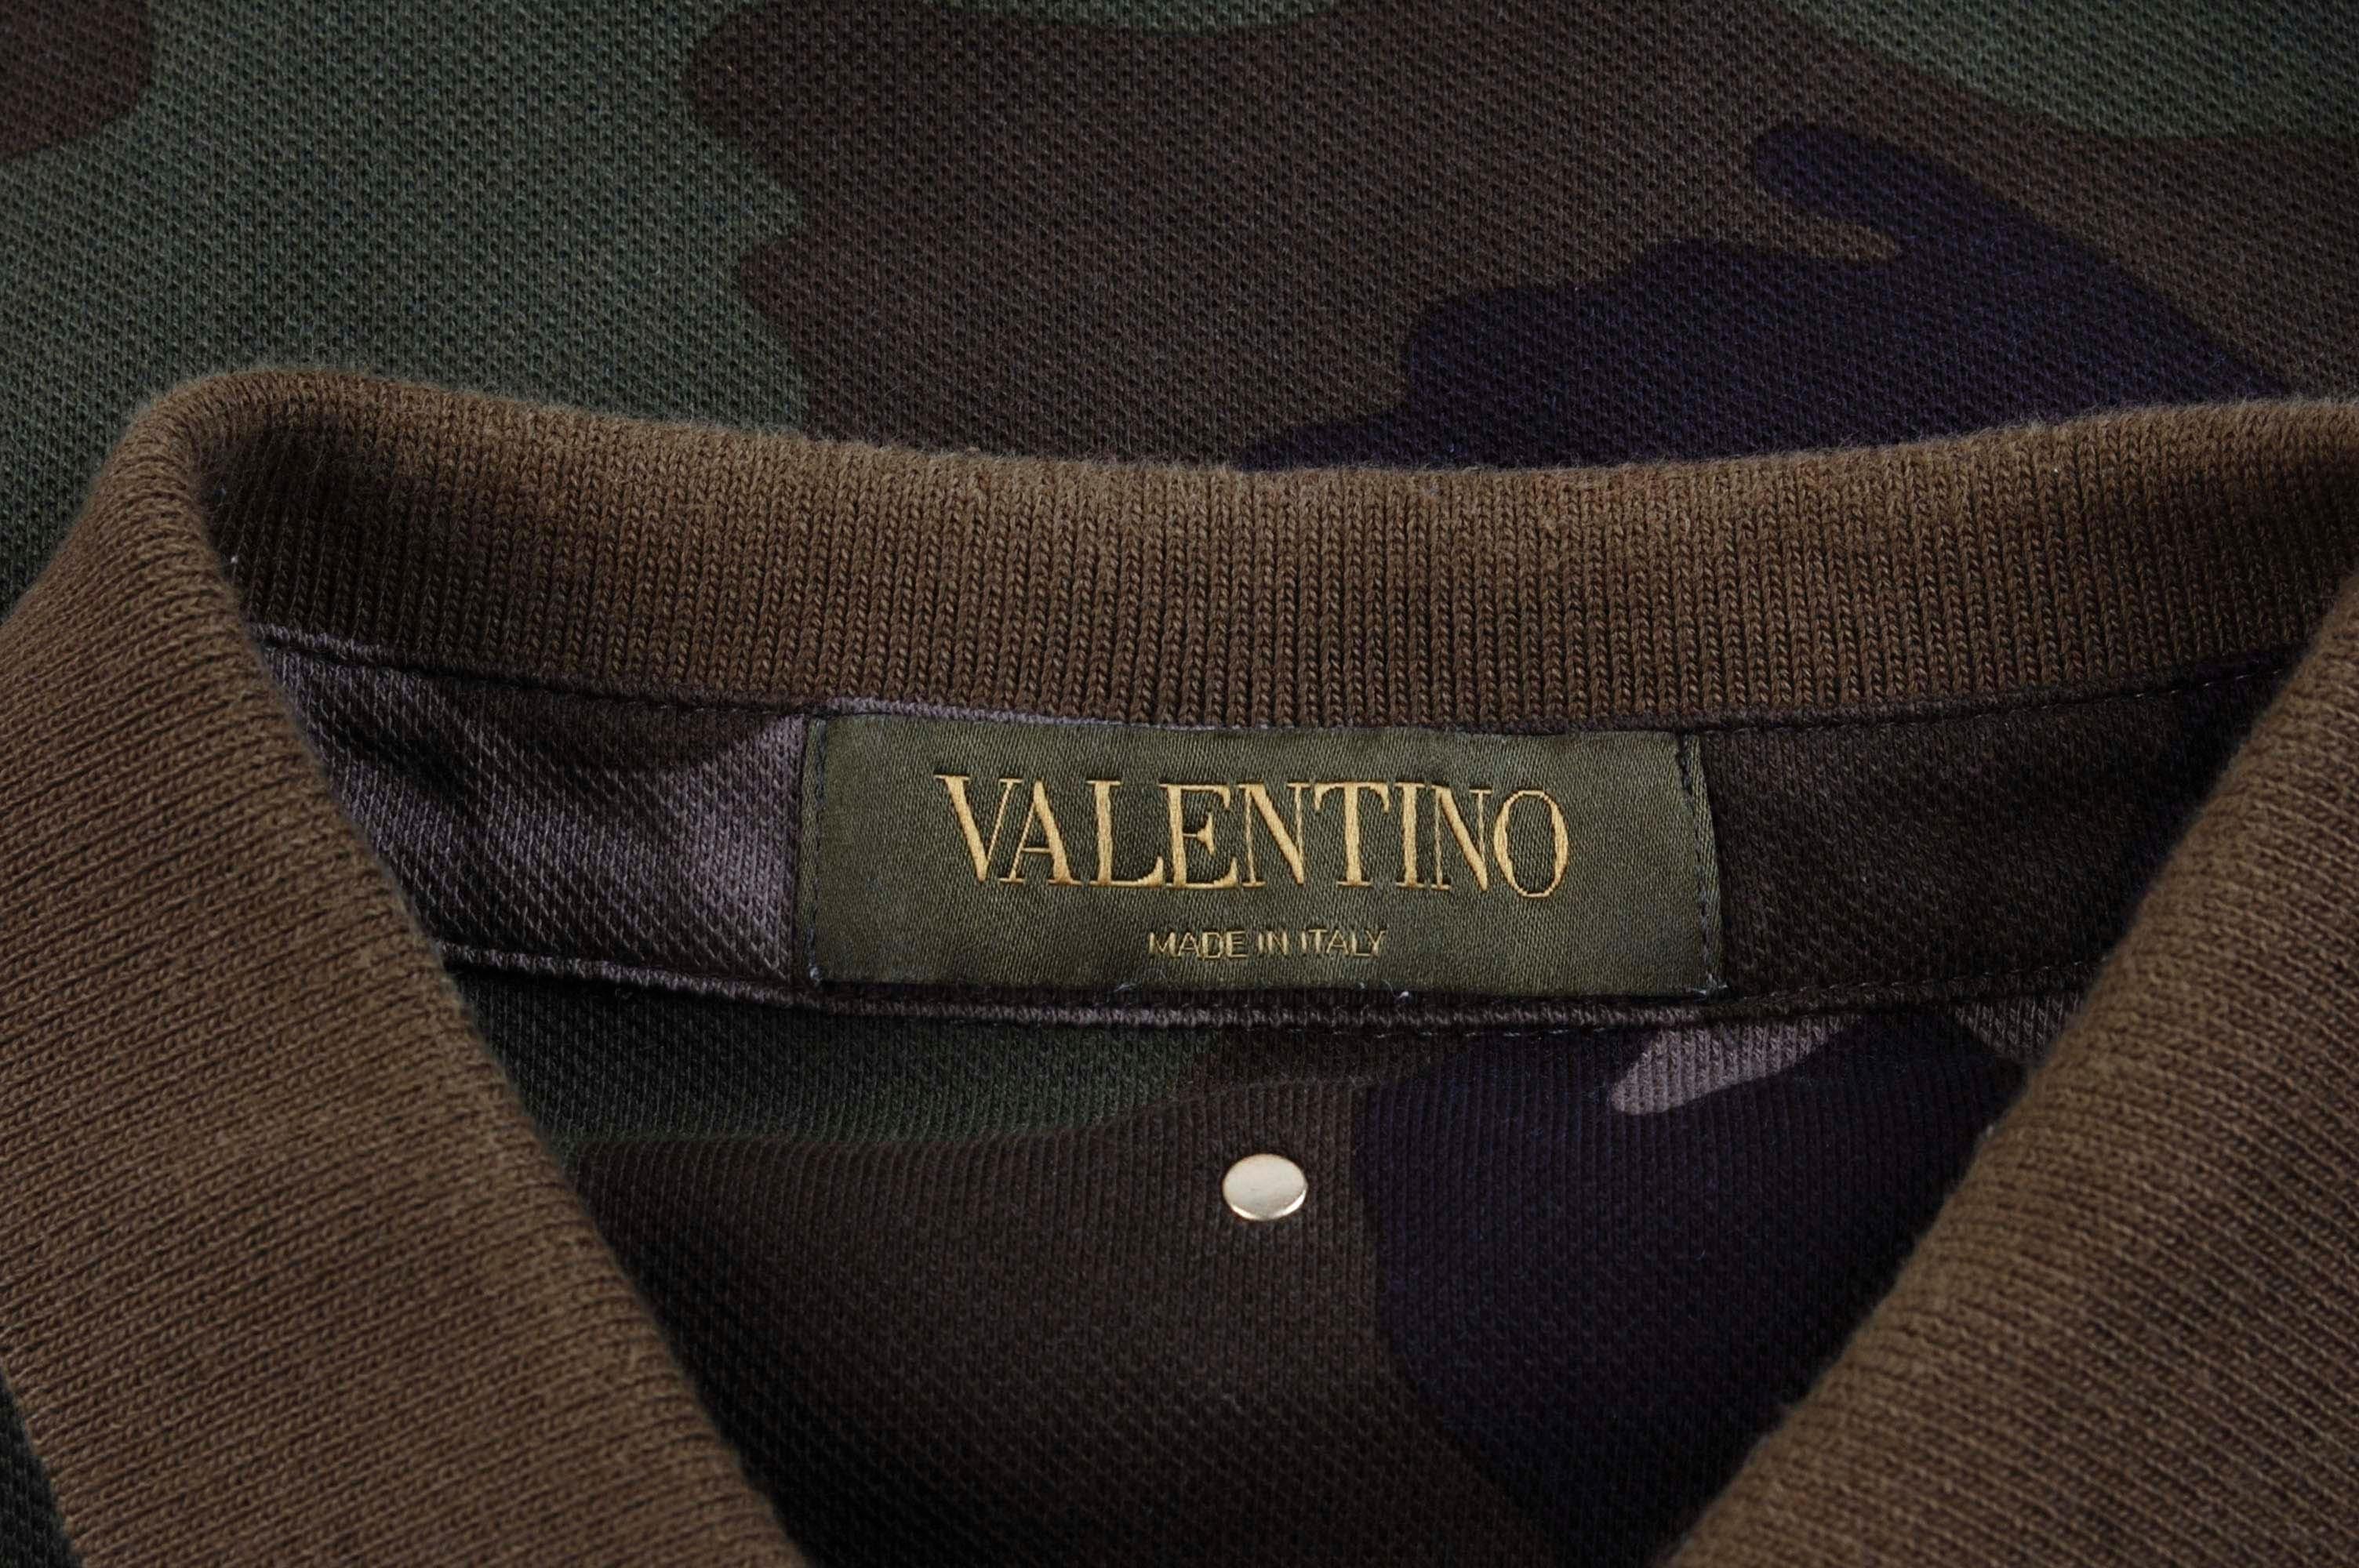 Valentino Camouflage Army Camo Men Polo T-Shirt Size M (runs S/M) In Excellent Condition For Sale In Kaunas, LT